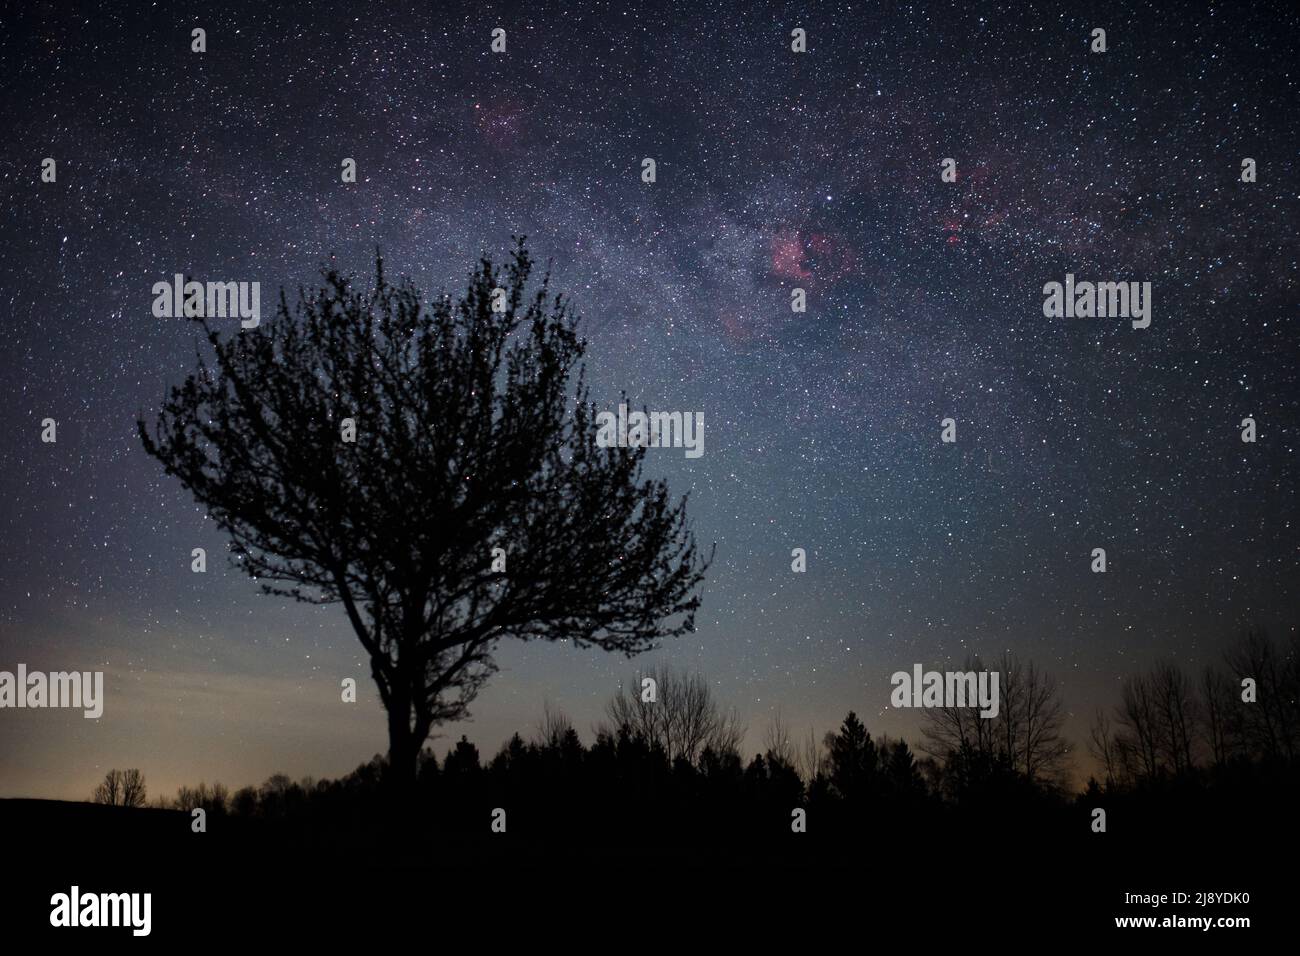 Night landscape of tree silhouette against dark sky and Milky Way, focus on background, Cygnus constellation Stock Photo